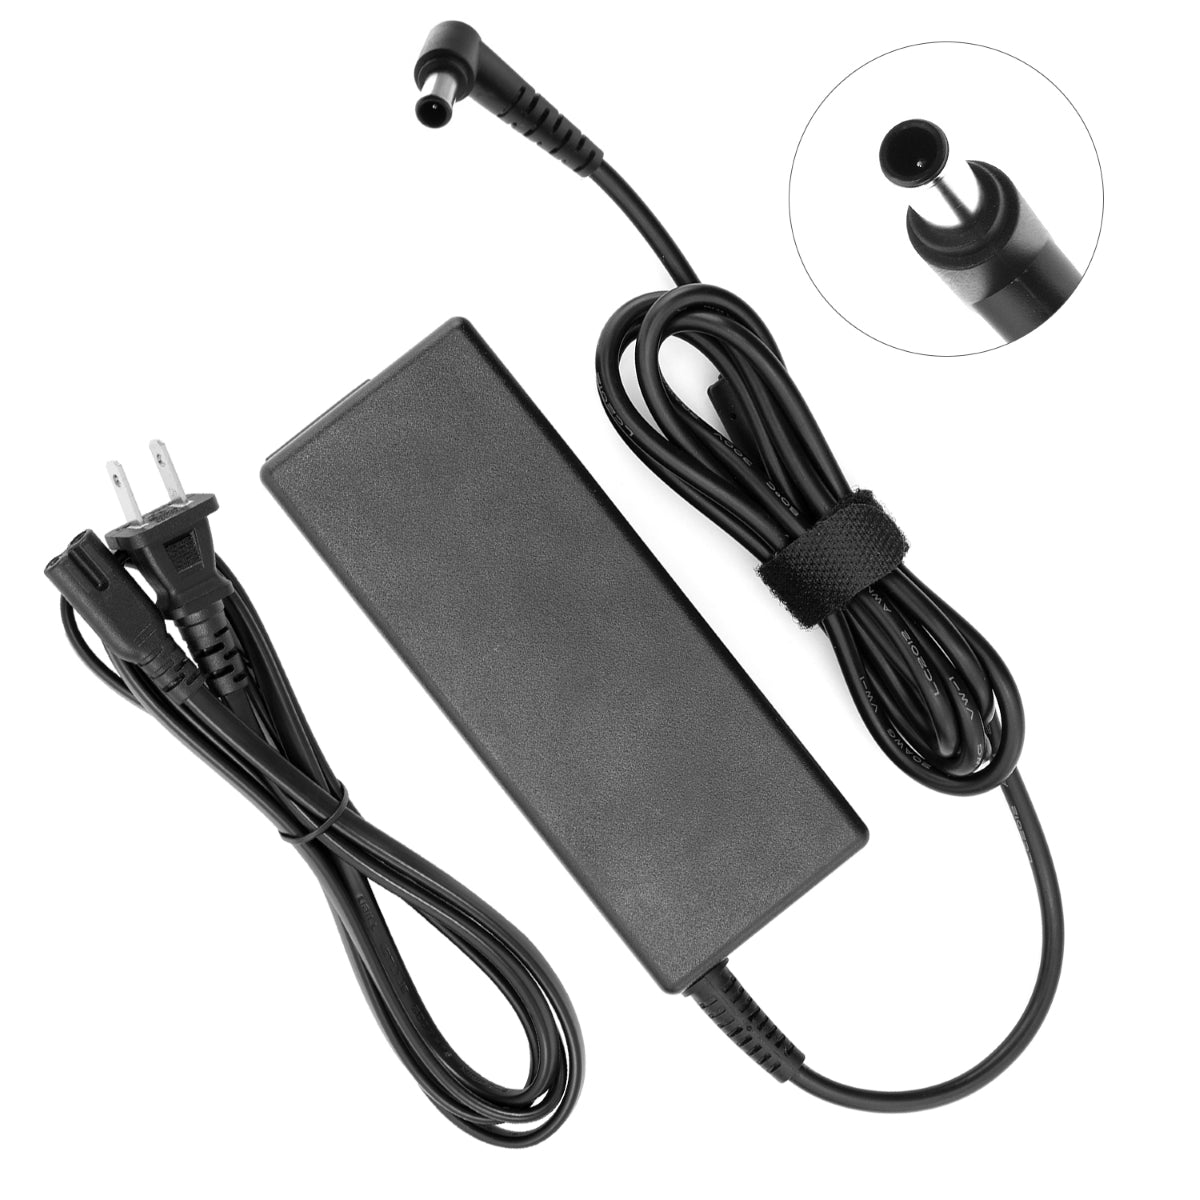 AC Adapter Power Supply for Samsung LC27F396FHNXZA Monitor